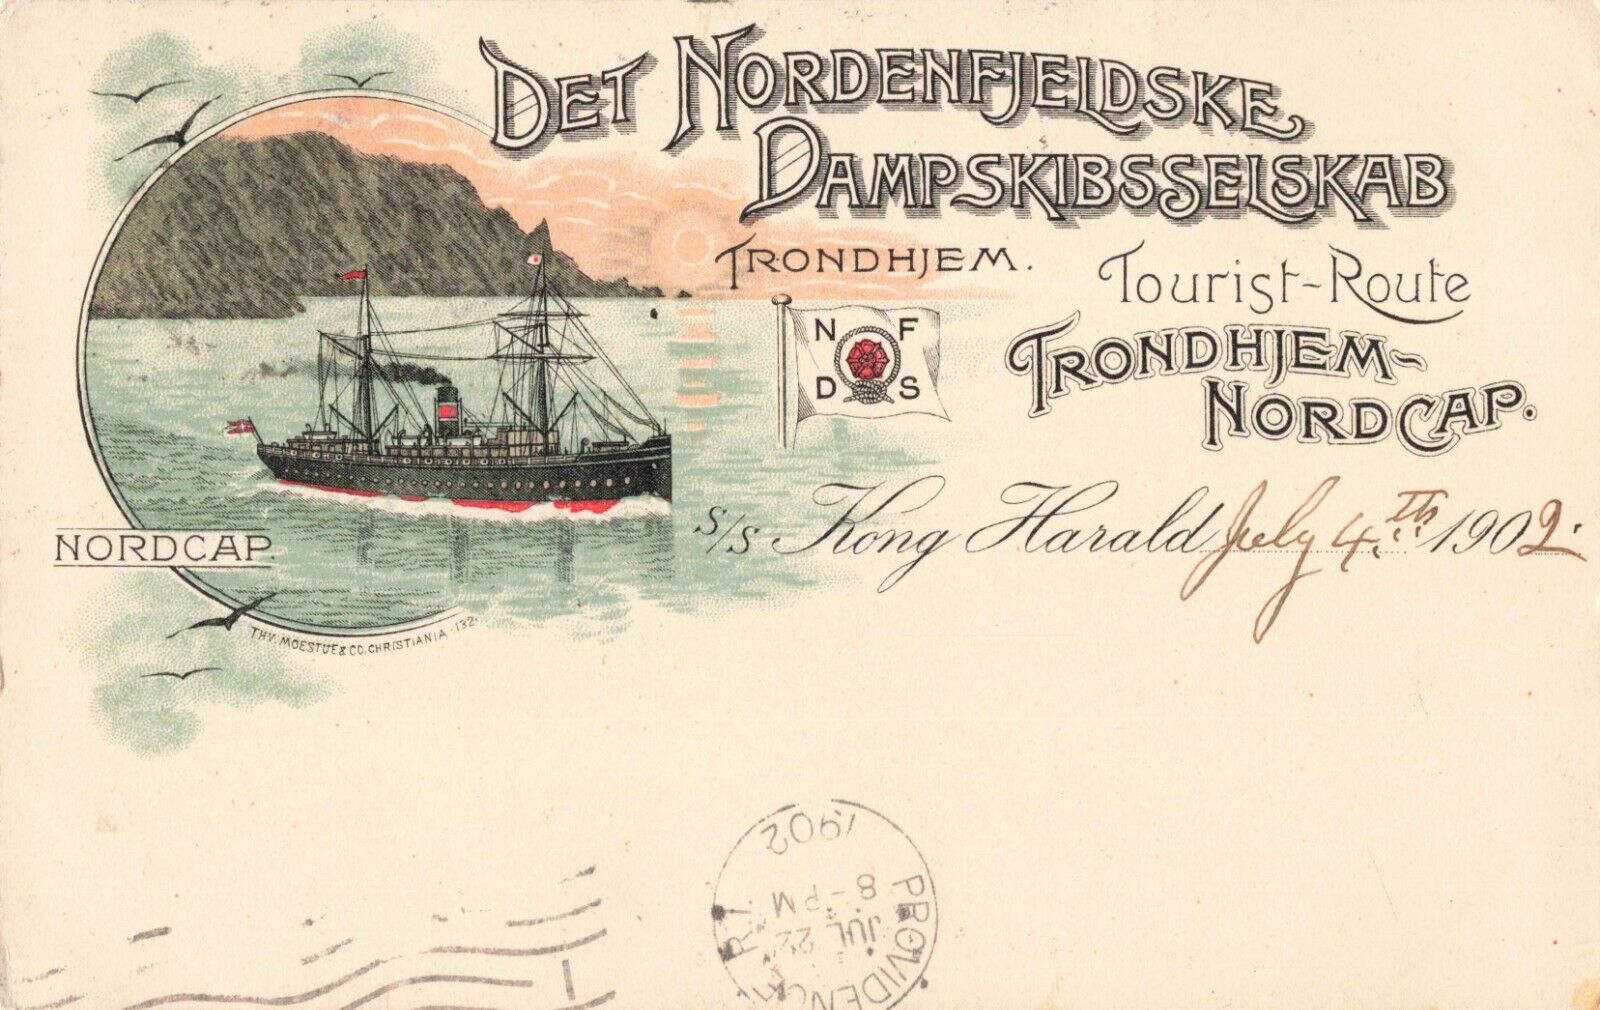 SS Kong Harald Ship North Cape Norway Trondheim Tourist Route 1902 Postcard